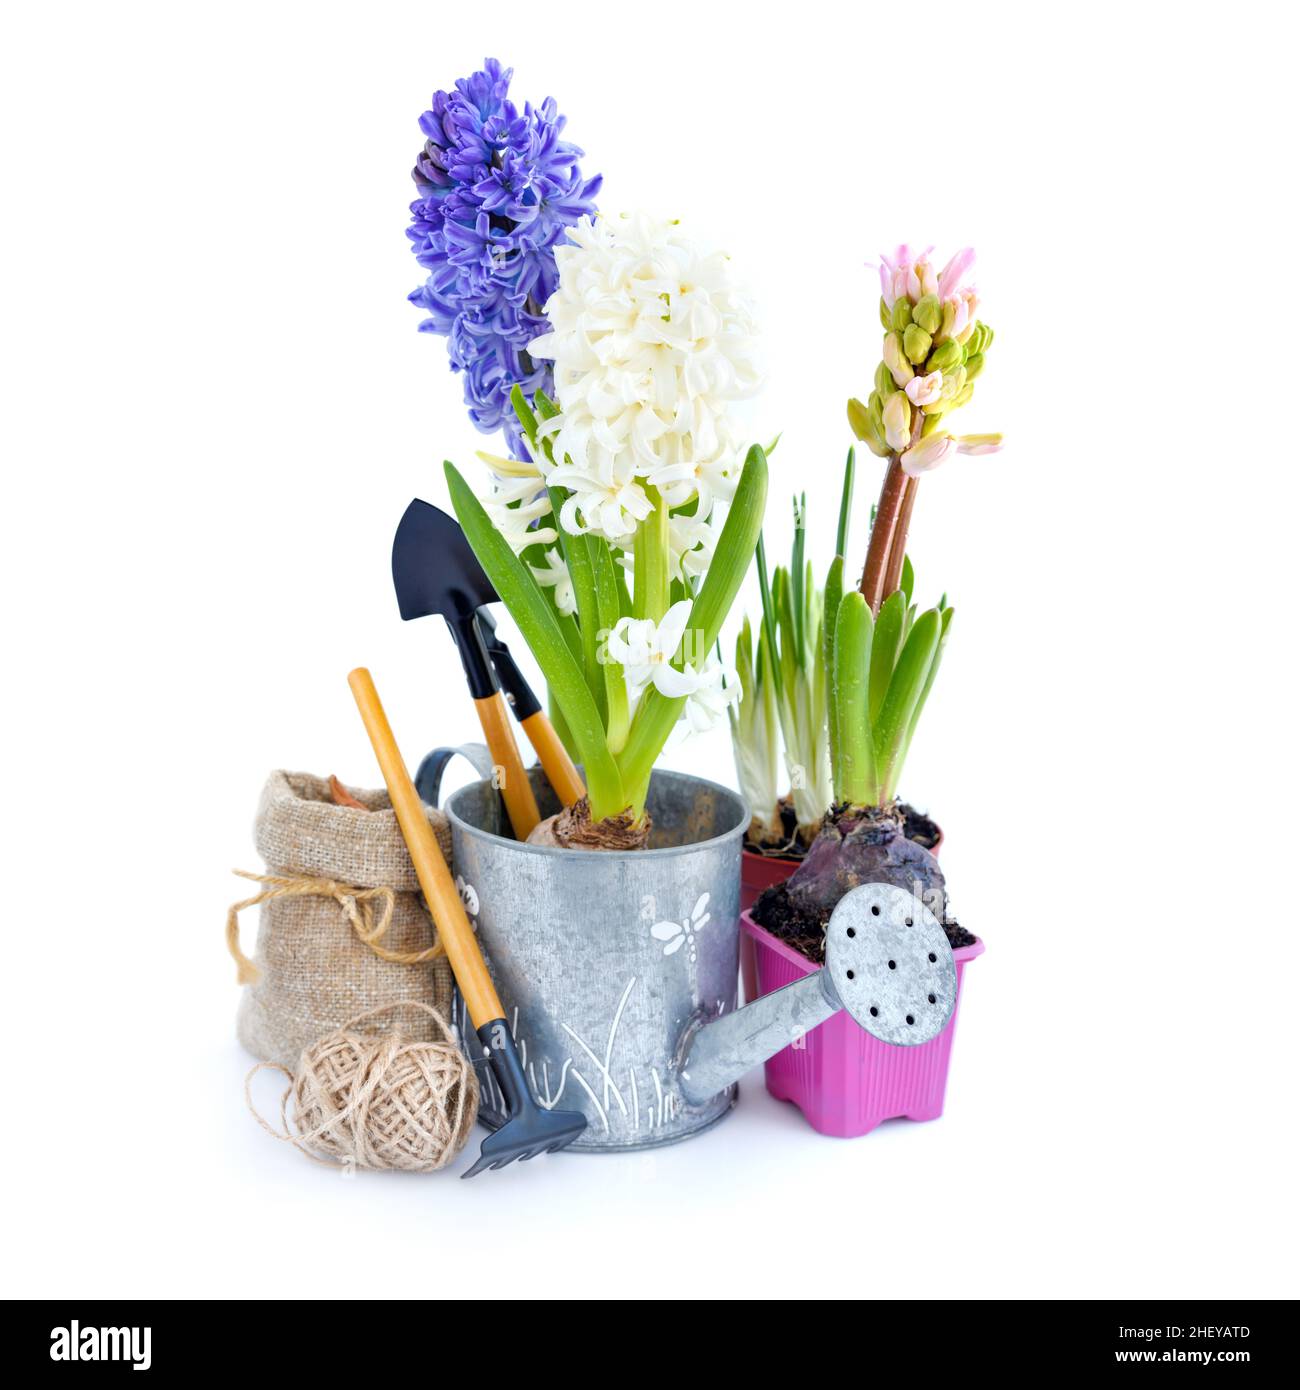 Spring hyacinth flowers and gardening tools on white background. Gardening concept Stock Photo